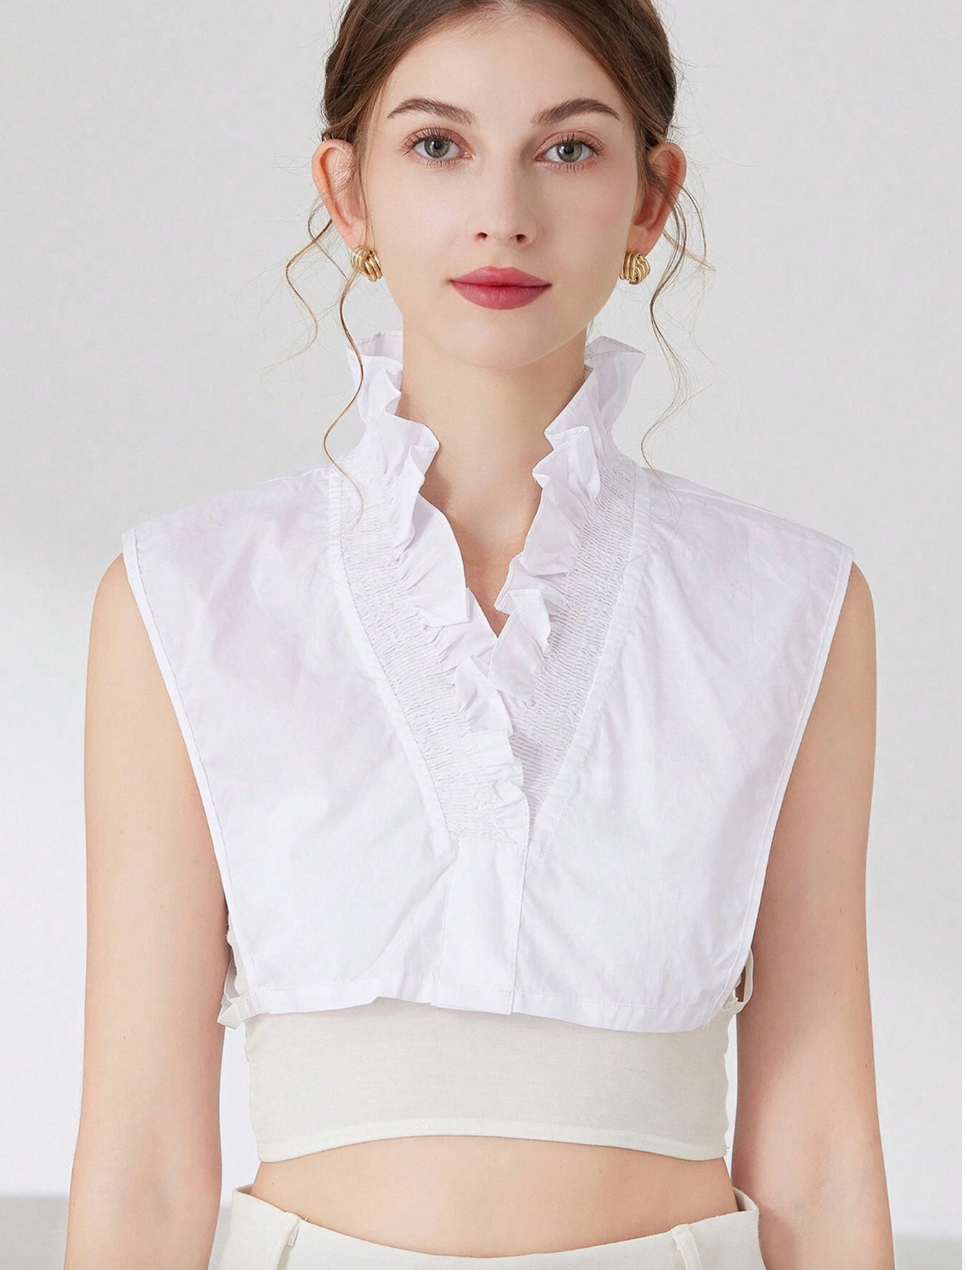 V-neck False Collar-260 Other Accessories-Darling-Coastal Bloom Boutique, find the trendiest versions of the popular styles and looks Located in Indialantic, FL